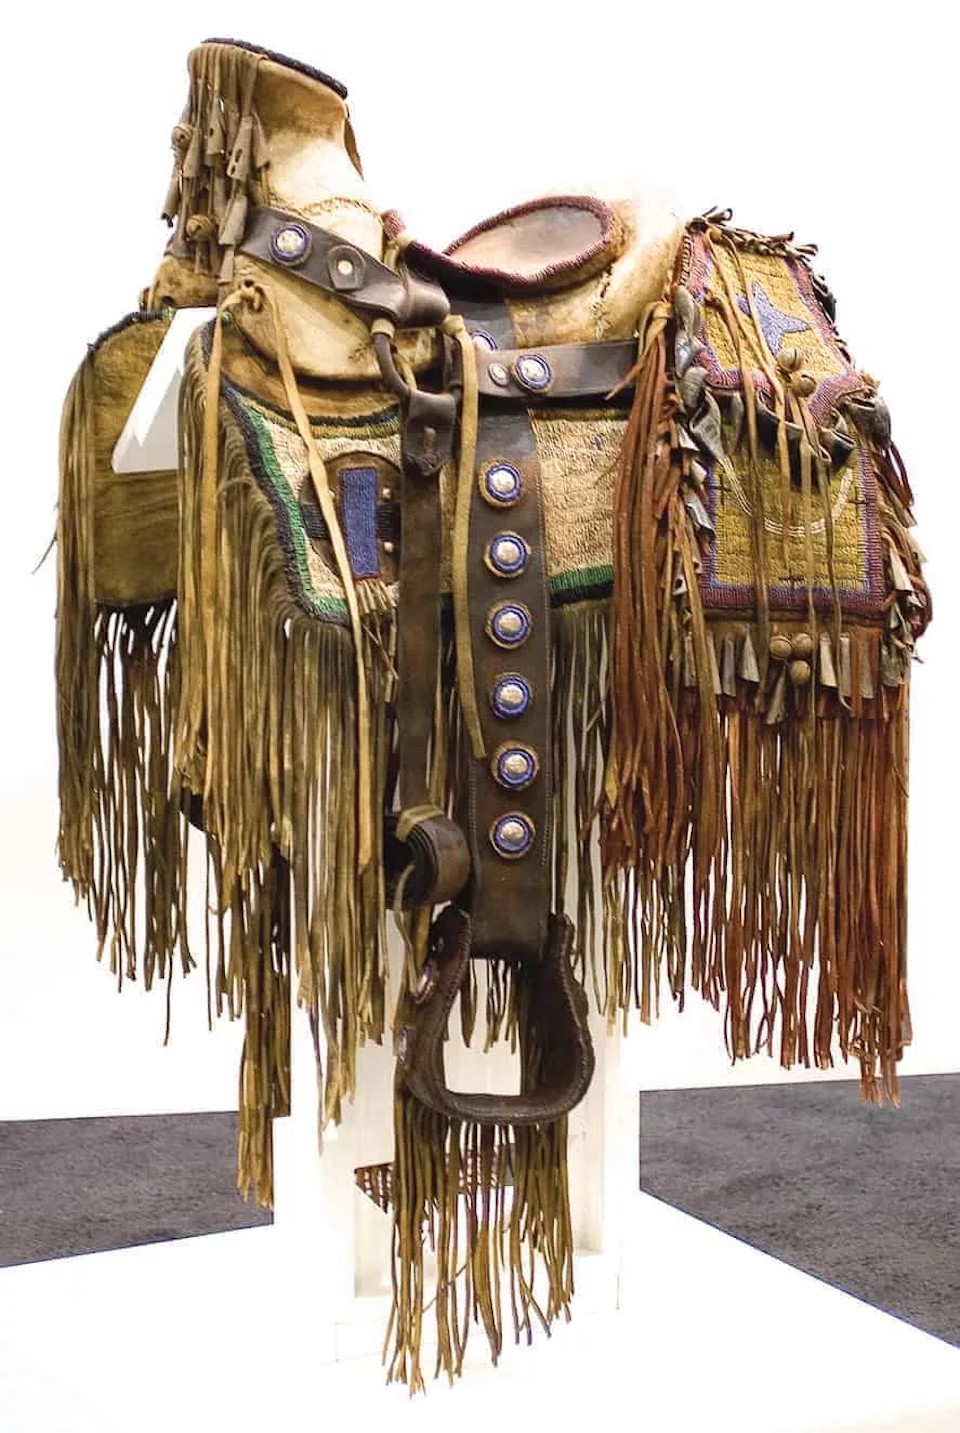 Painstakingly handcrafted works like this juried saddle entry from Many Tears can be found at the Western Design Conference Exhibit + Sale this September 9-12, 2021.